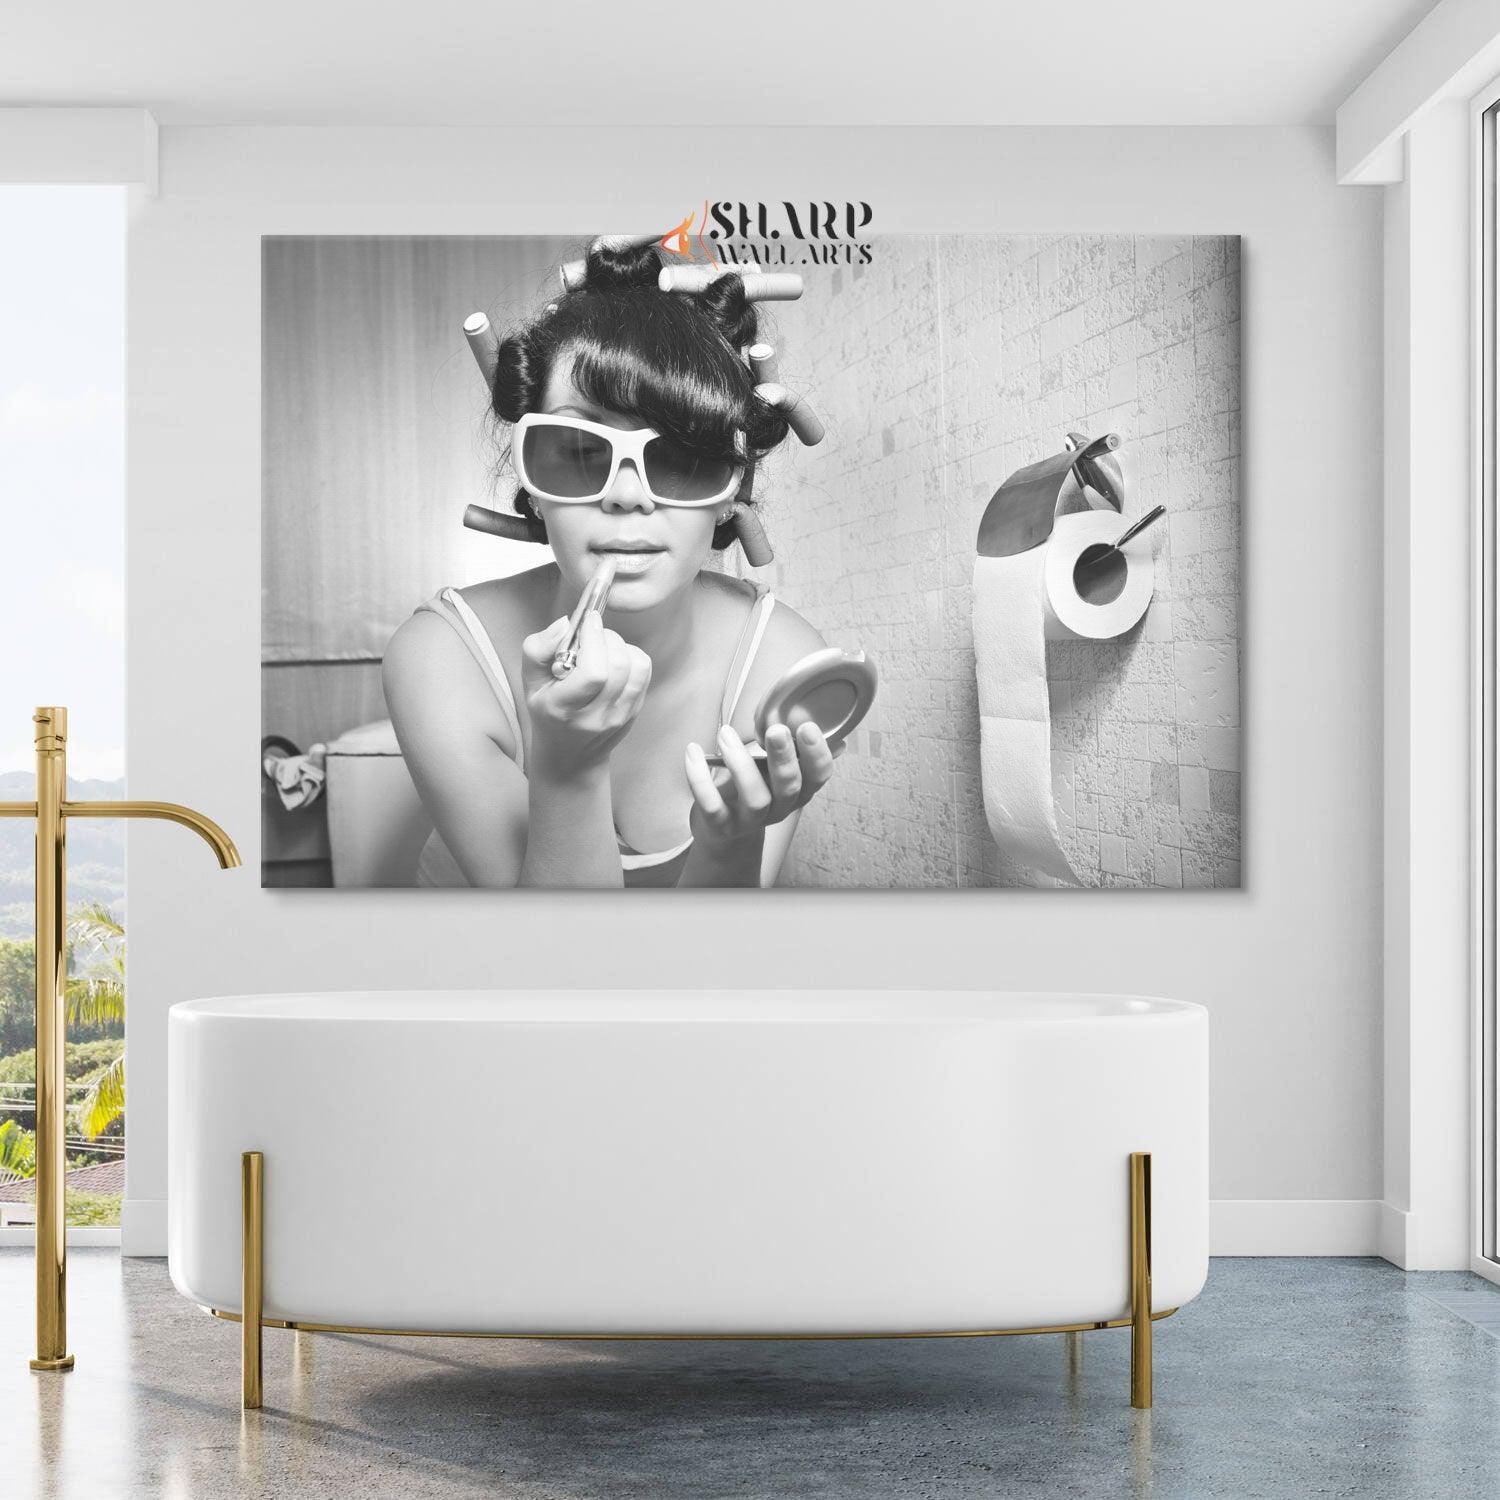 Girl Putting On Makeup Sits In The Toilet Canvas Wall Art - SharpWallArts